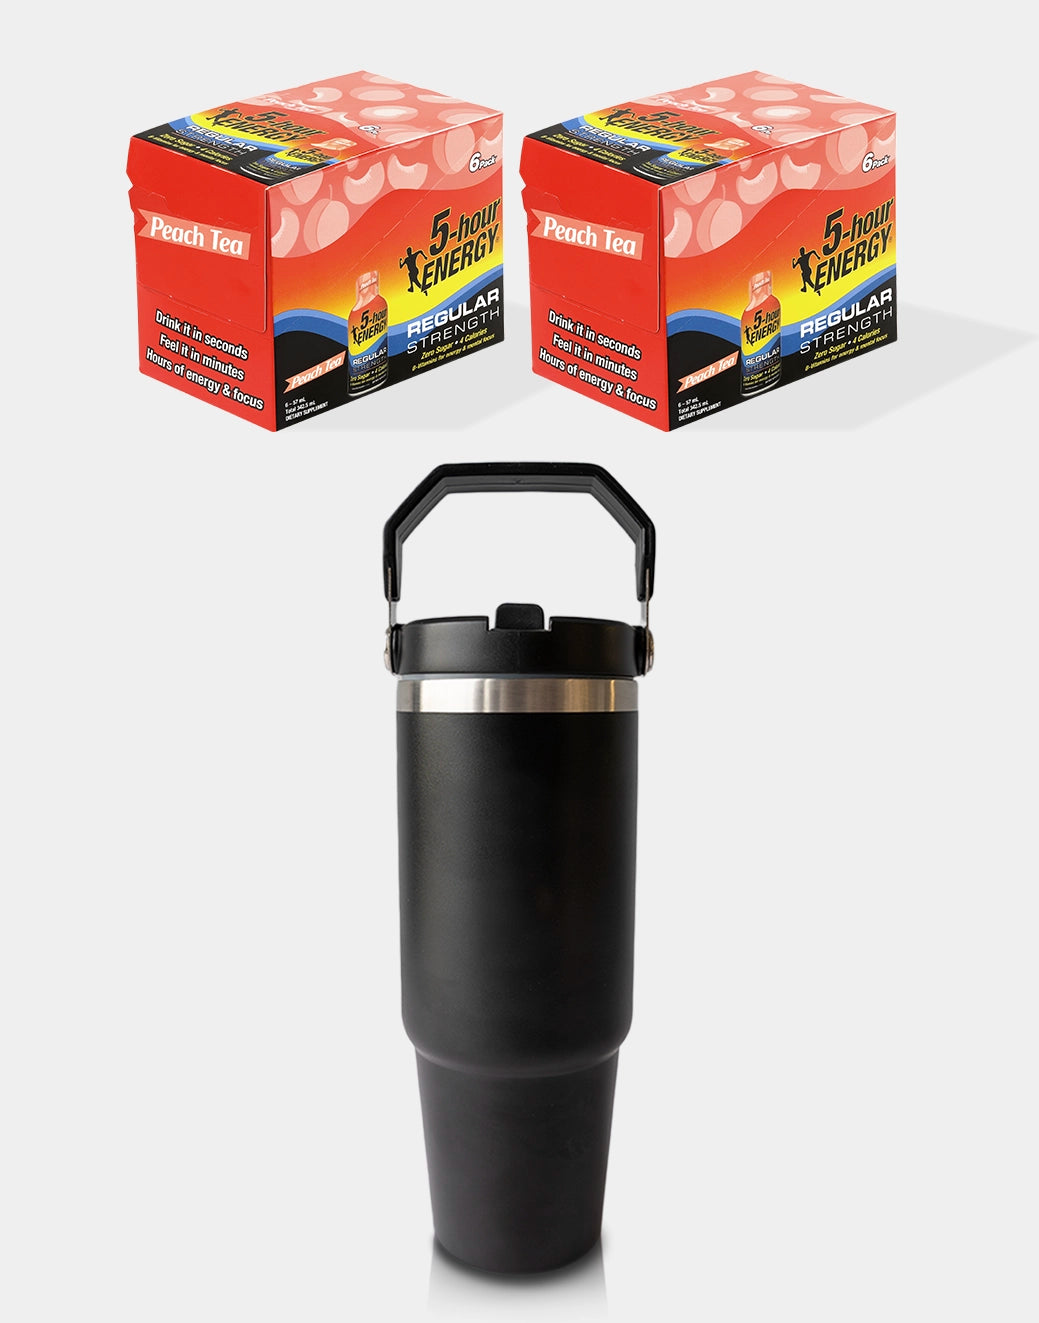 FREE Insulated Tumbler with Purchase